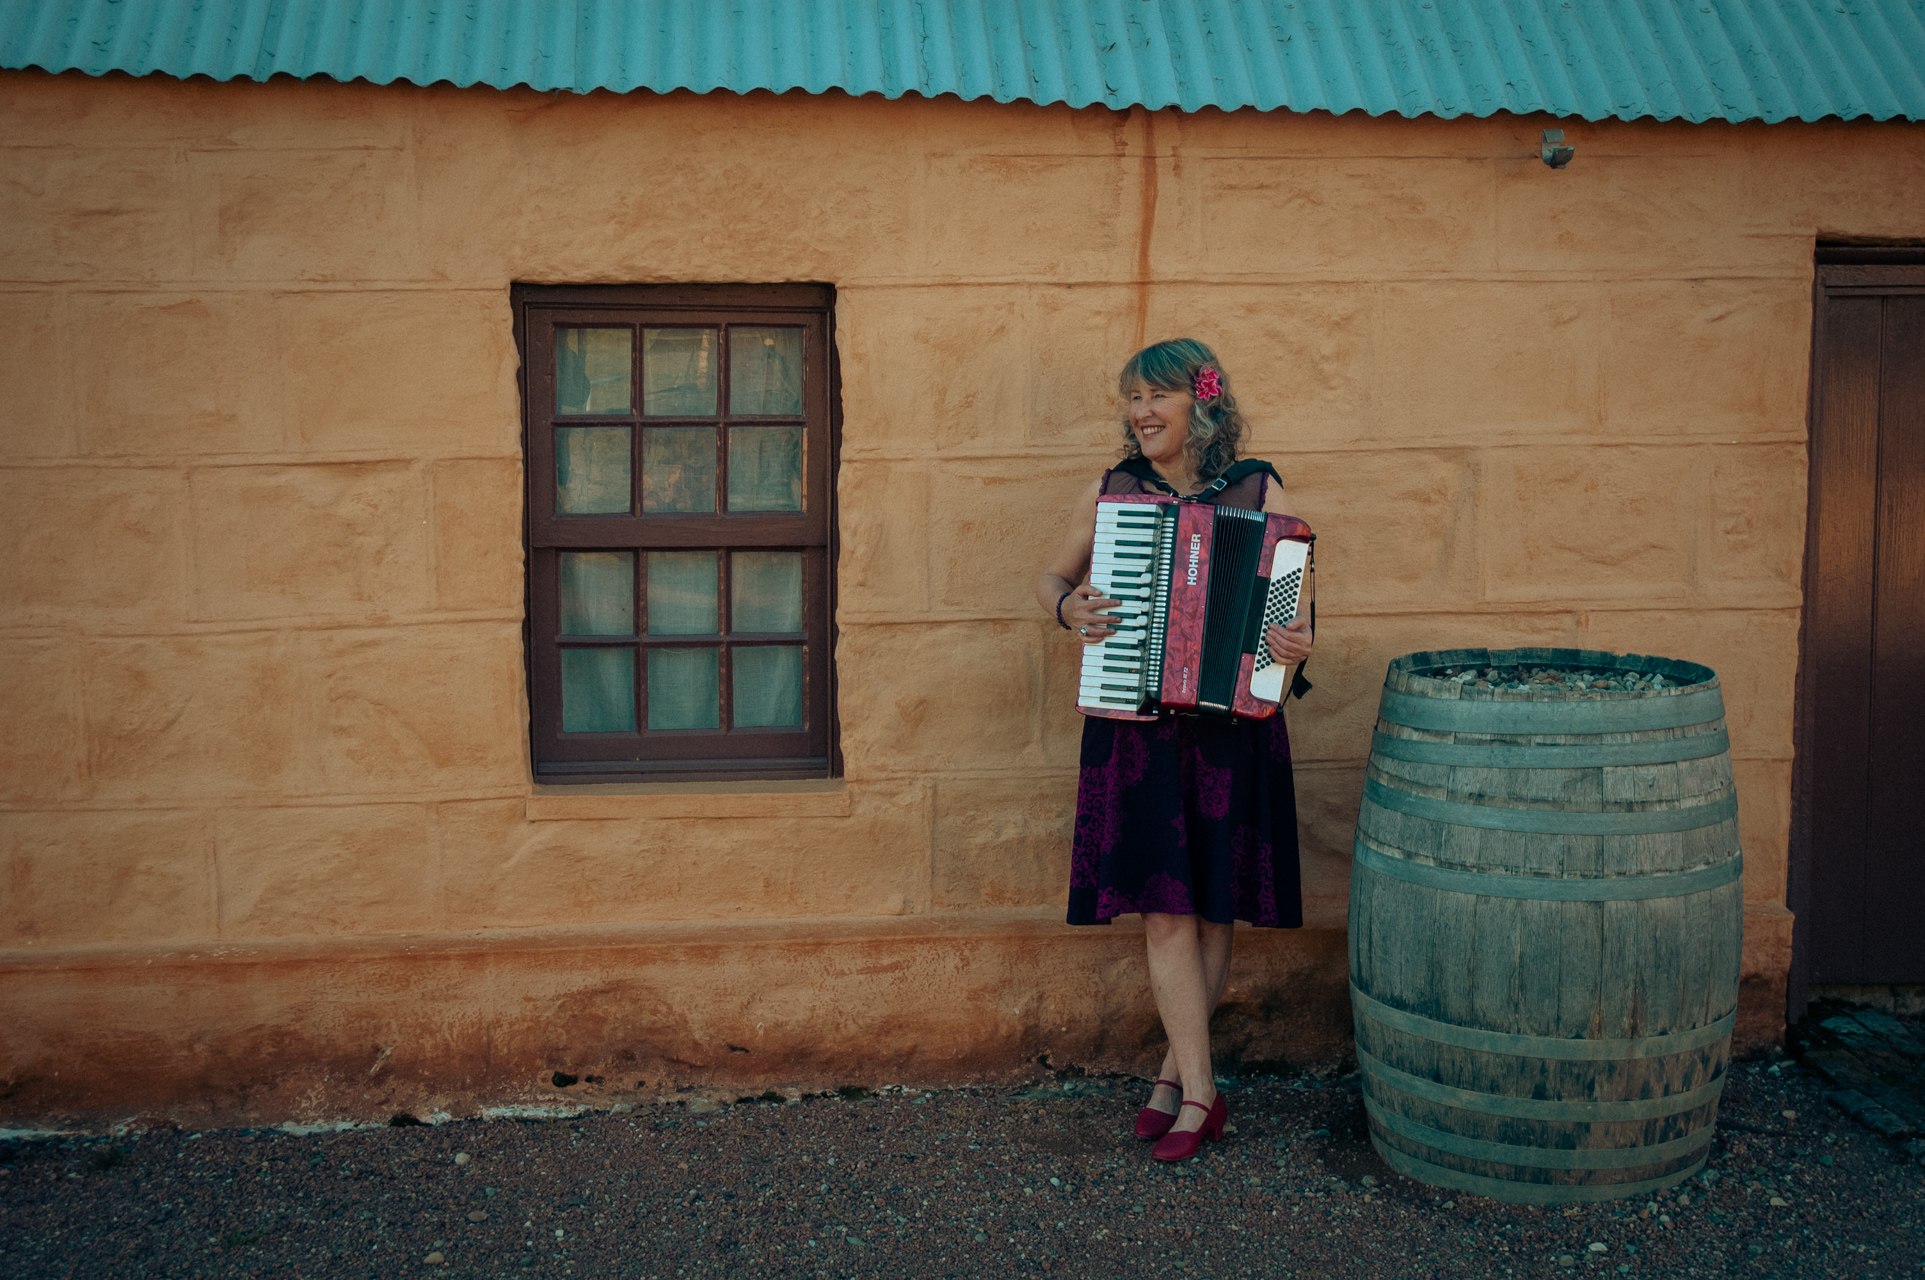 Queen Juanita played her accordion in front of a heritage homestead